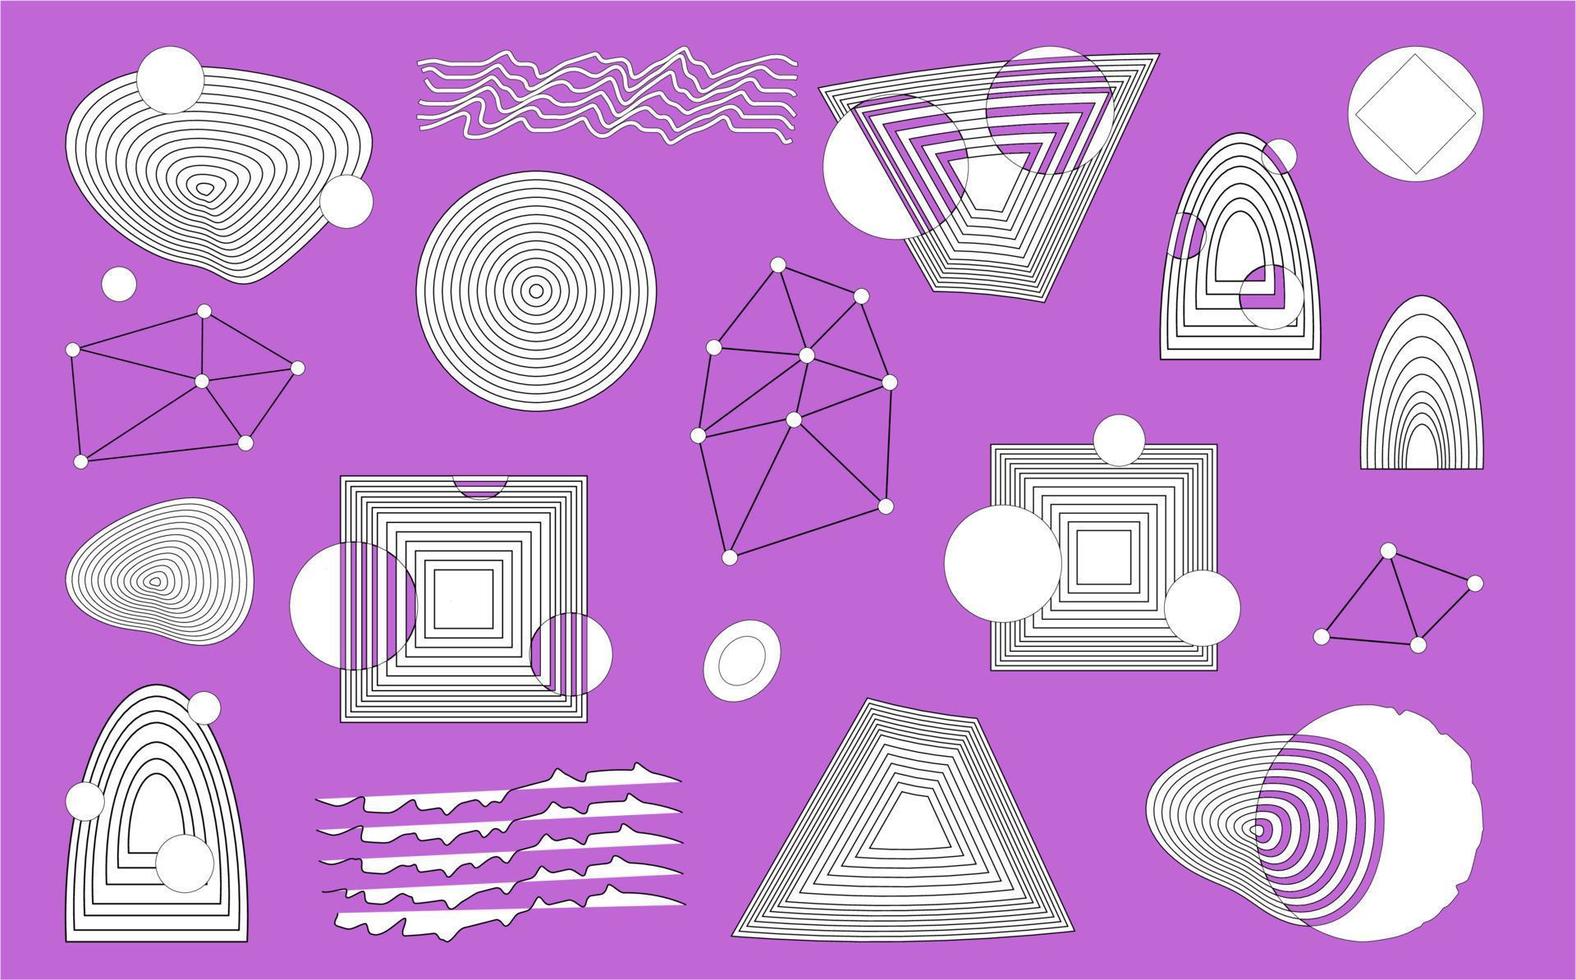 Vector set of futuristic element of cybernetic grids. Retro-style digital element, various geometric illustration, polar grid, circles, squares, vibrations, gravity. Cyberpunk in the style of the 80s.